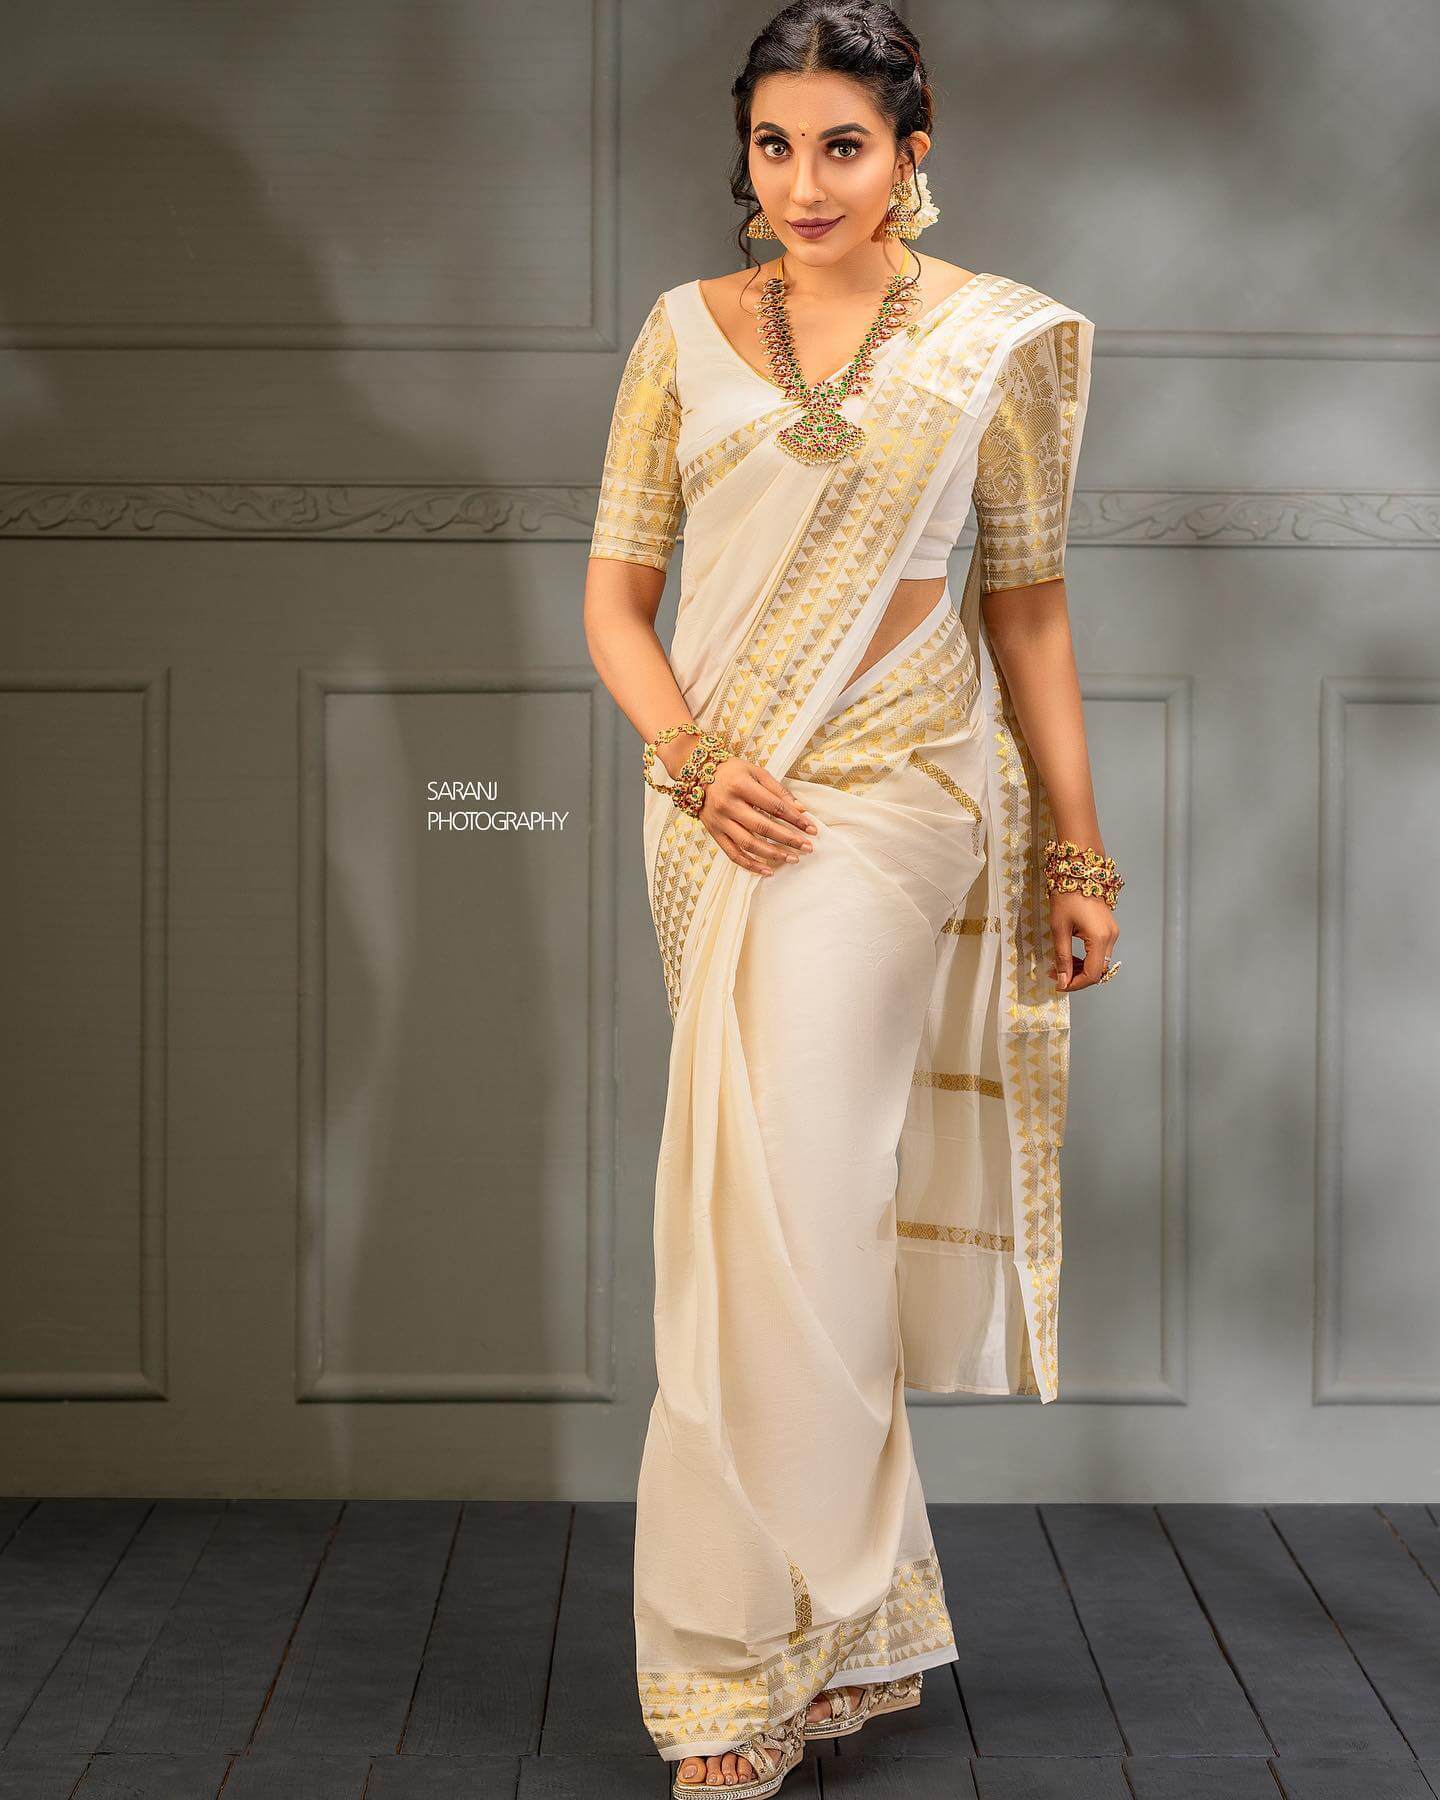 Parvathy Nair Slaying The Traditional Look In White & Golden Zari Saree